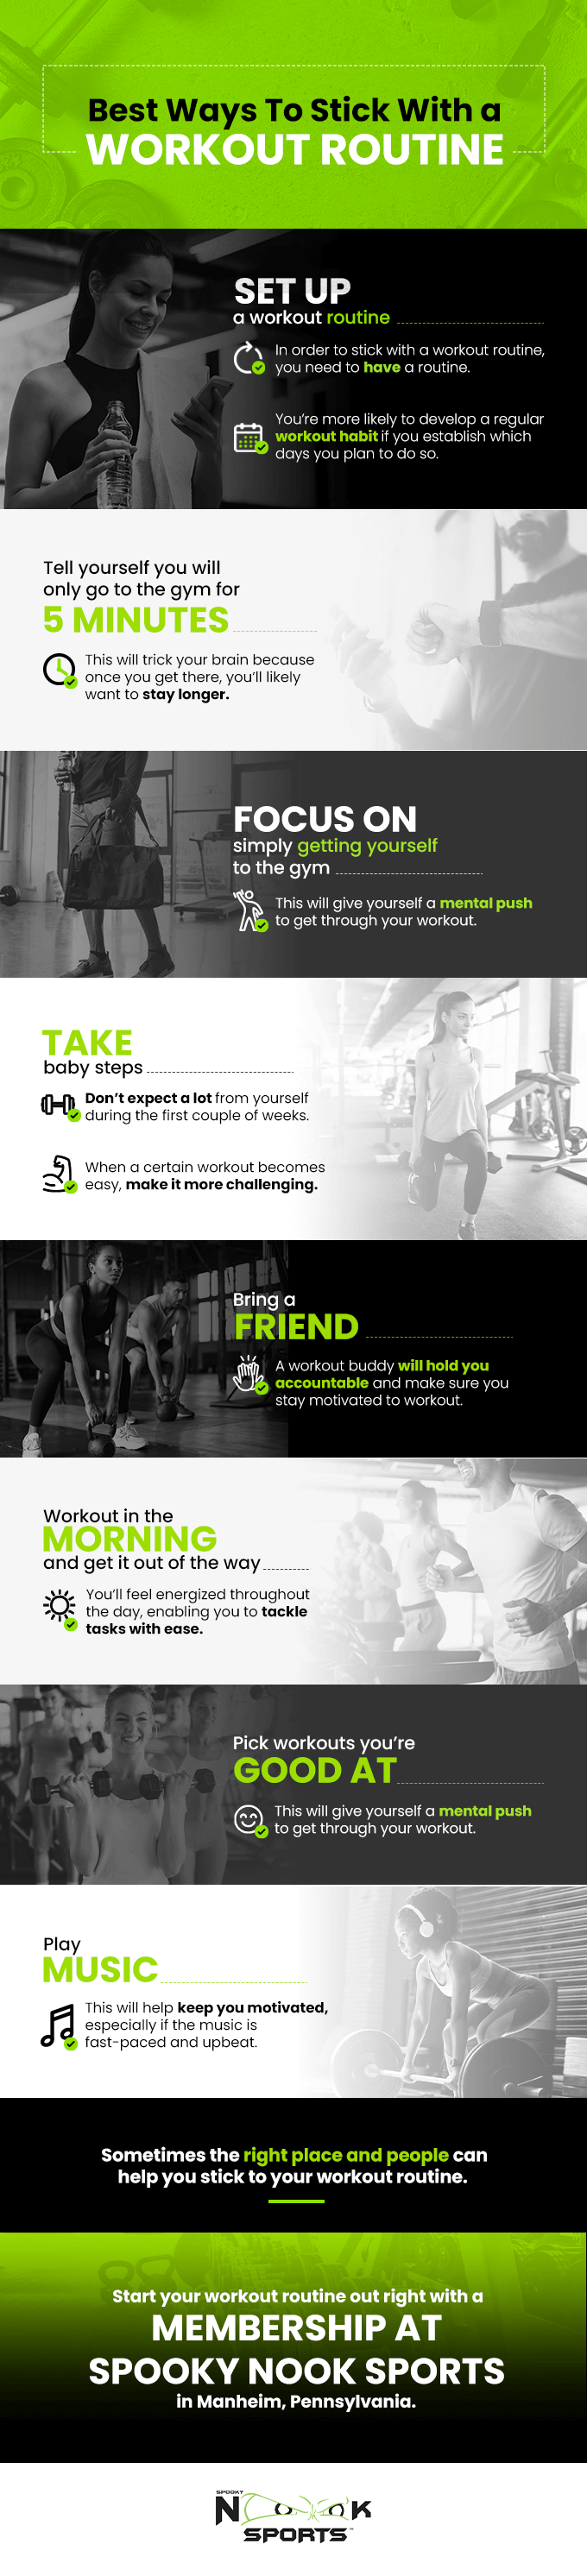 best ways to stick with a workout routine - infographic